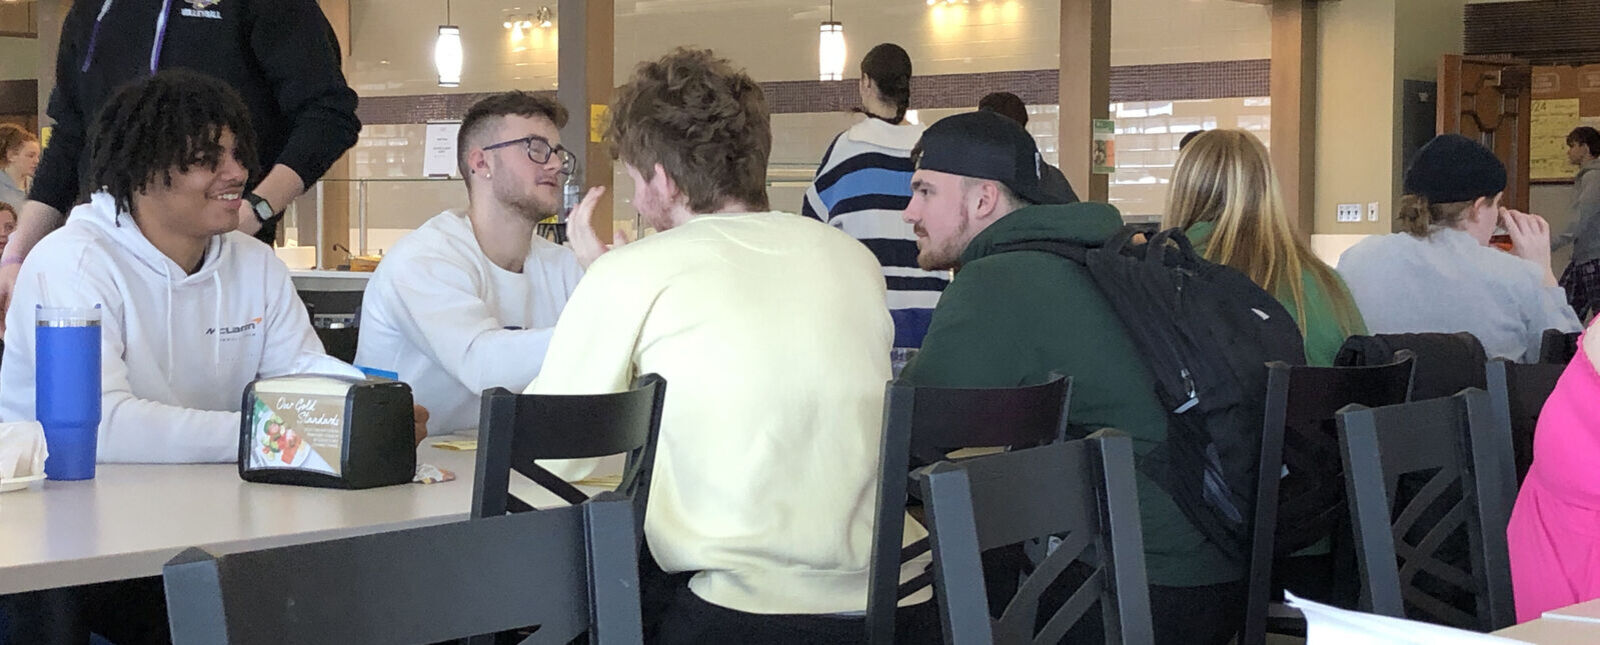 A group of students talk and laugh around a dining hall table.